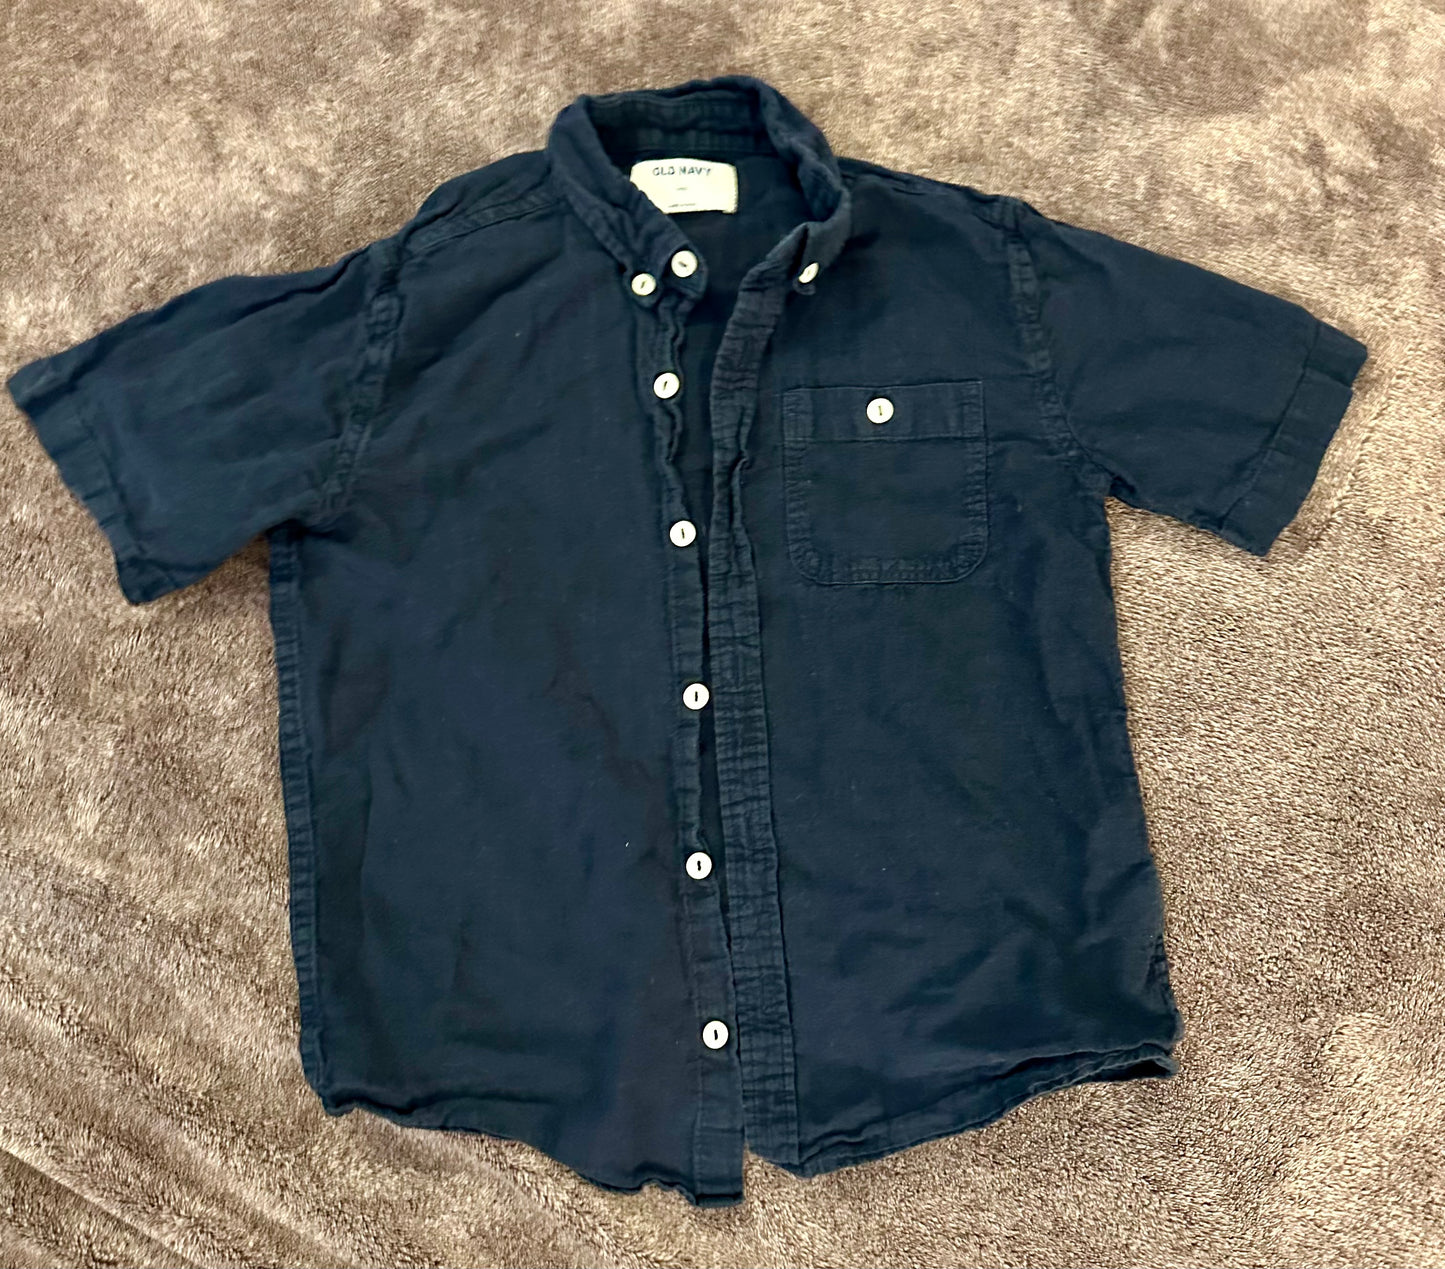 Old navy button up boys size 8 (M)